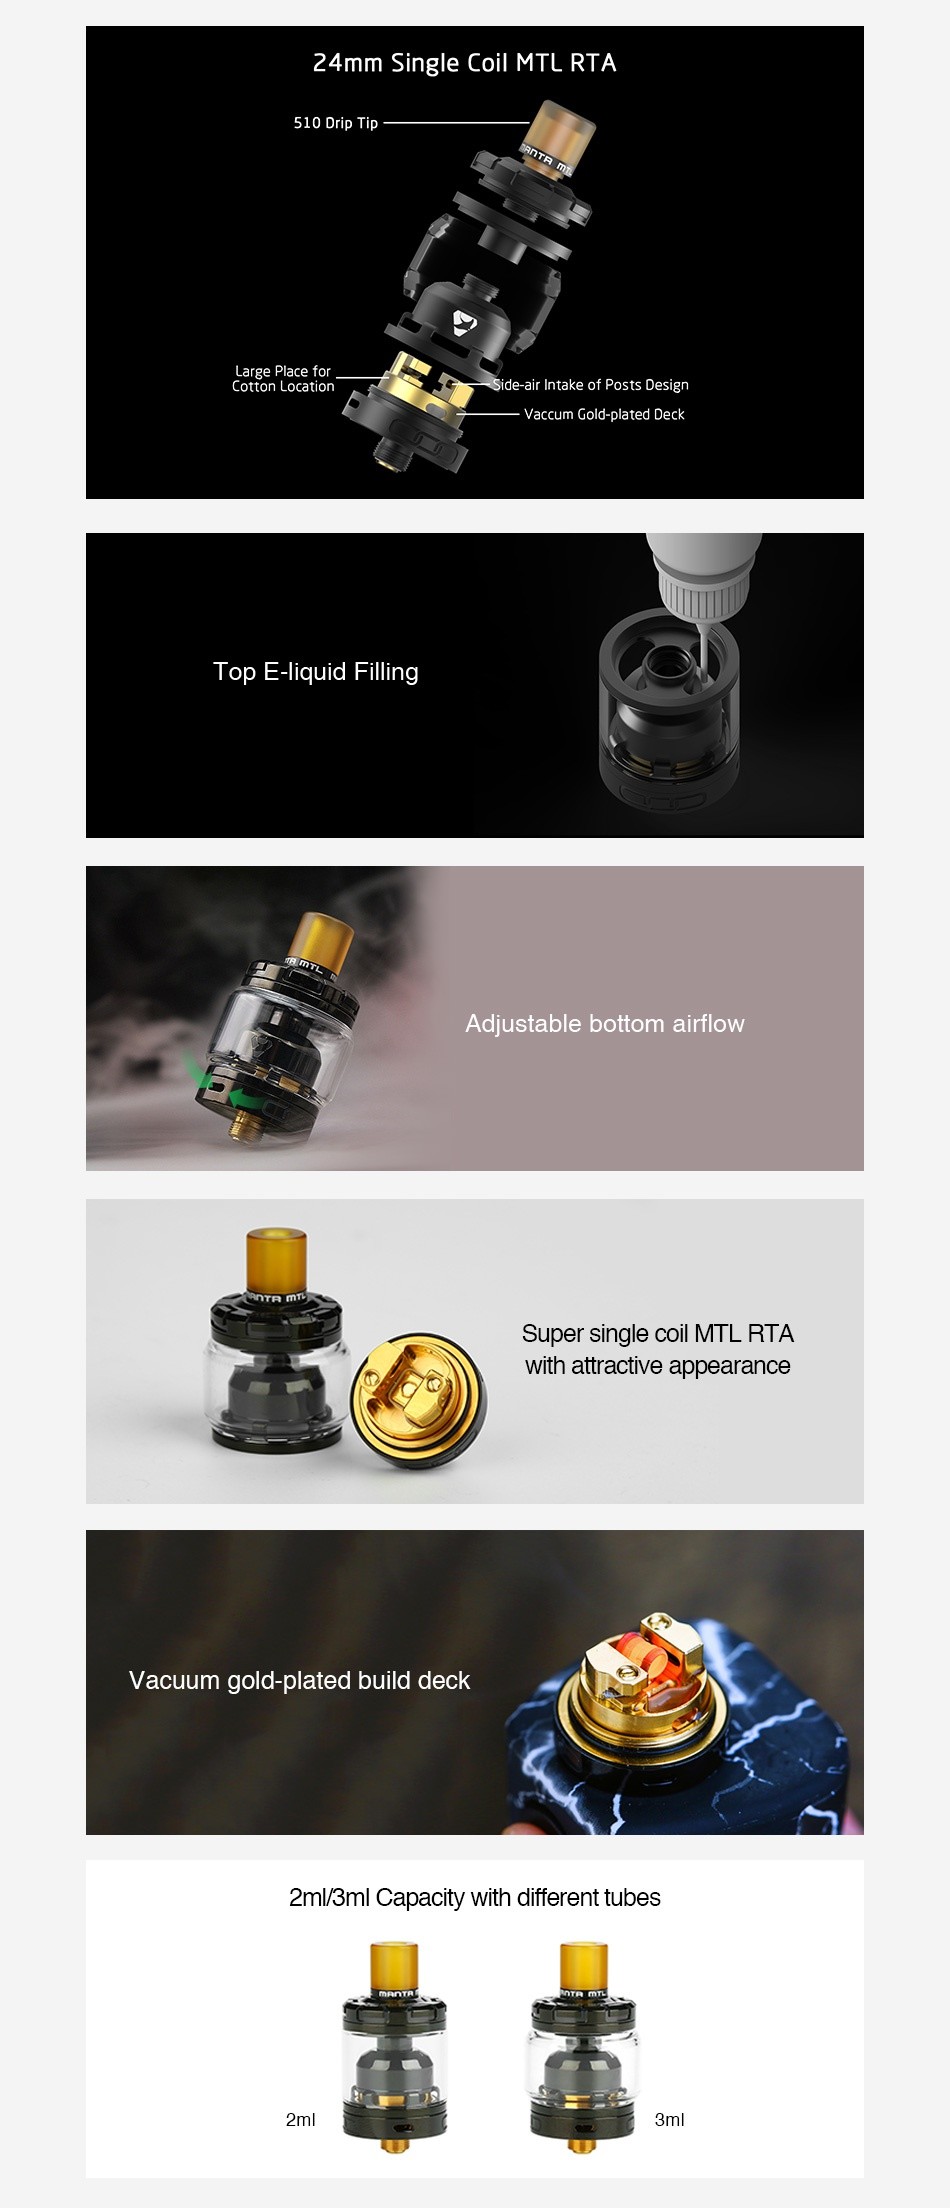 Advken MANTA MTL RTA 2ml/3ml 24mm Single Coil MTL RTA 510 Drip Tip Cotton locat on Vaccum Gold plated Deck Top E liquid Filling Adjustable bottom airflow Super single coll MIL RTA with attractive appearance Vacuum gold plated build deck 2m 3ml Capacity with different tubes 2ml 3ml